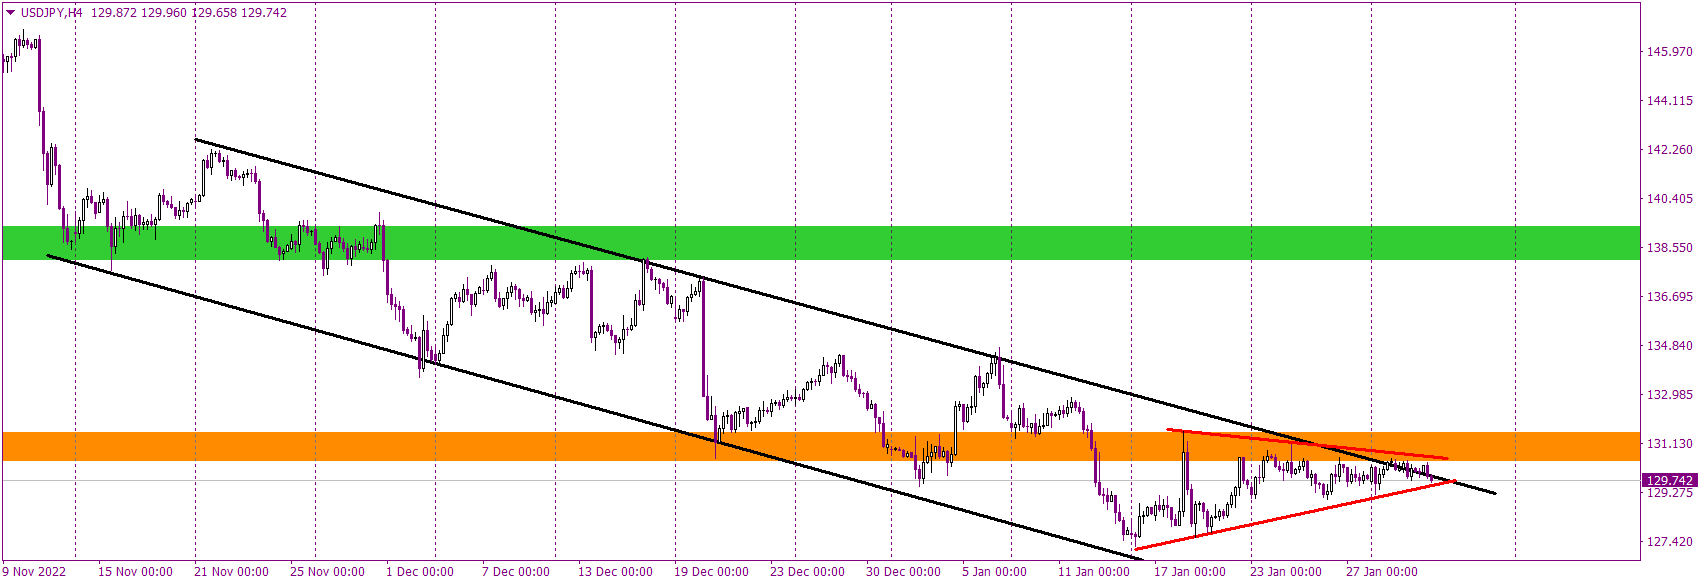 Today, the sideways trend on the USDJPY will end